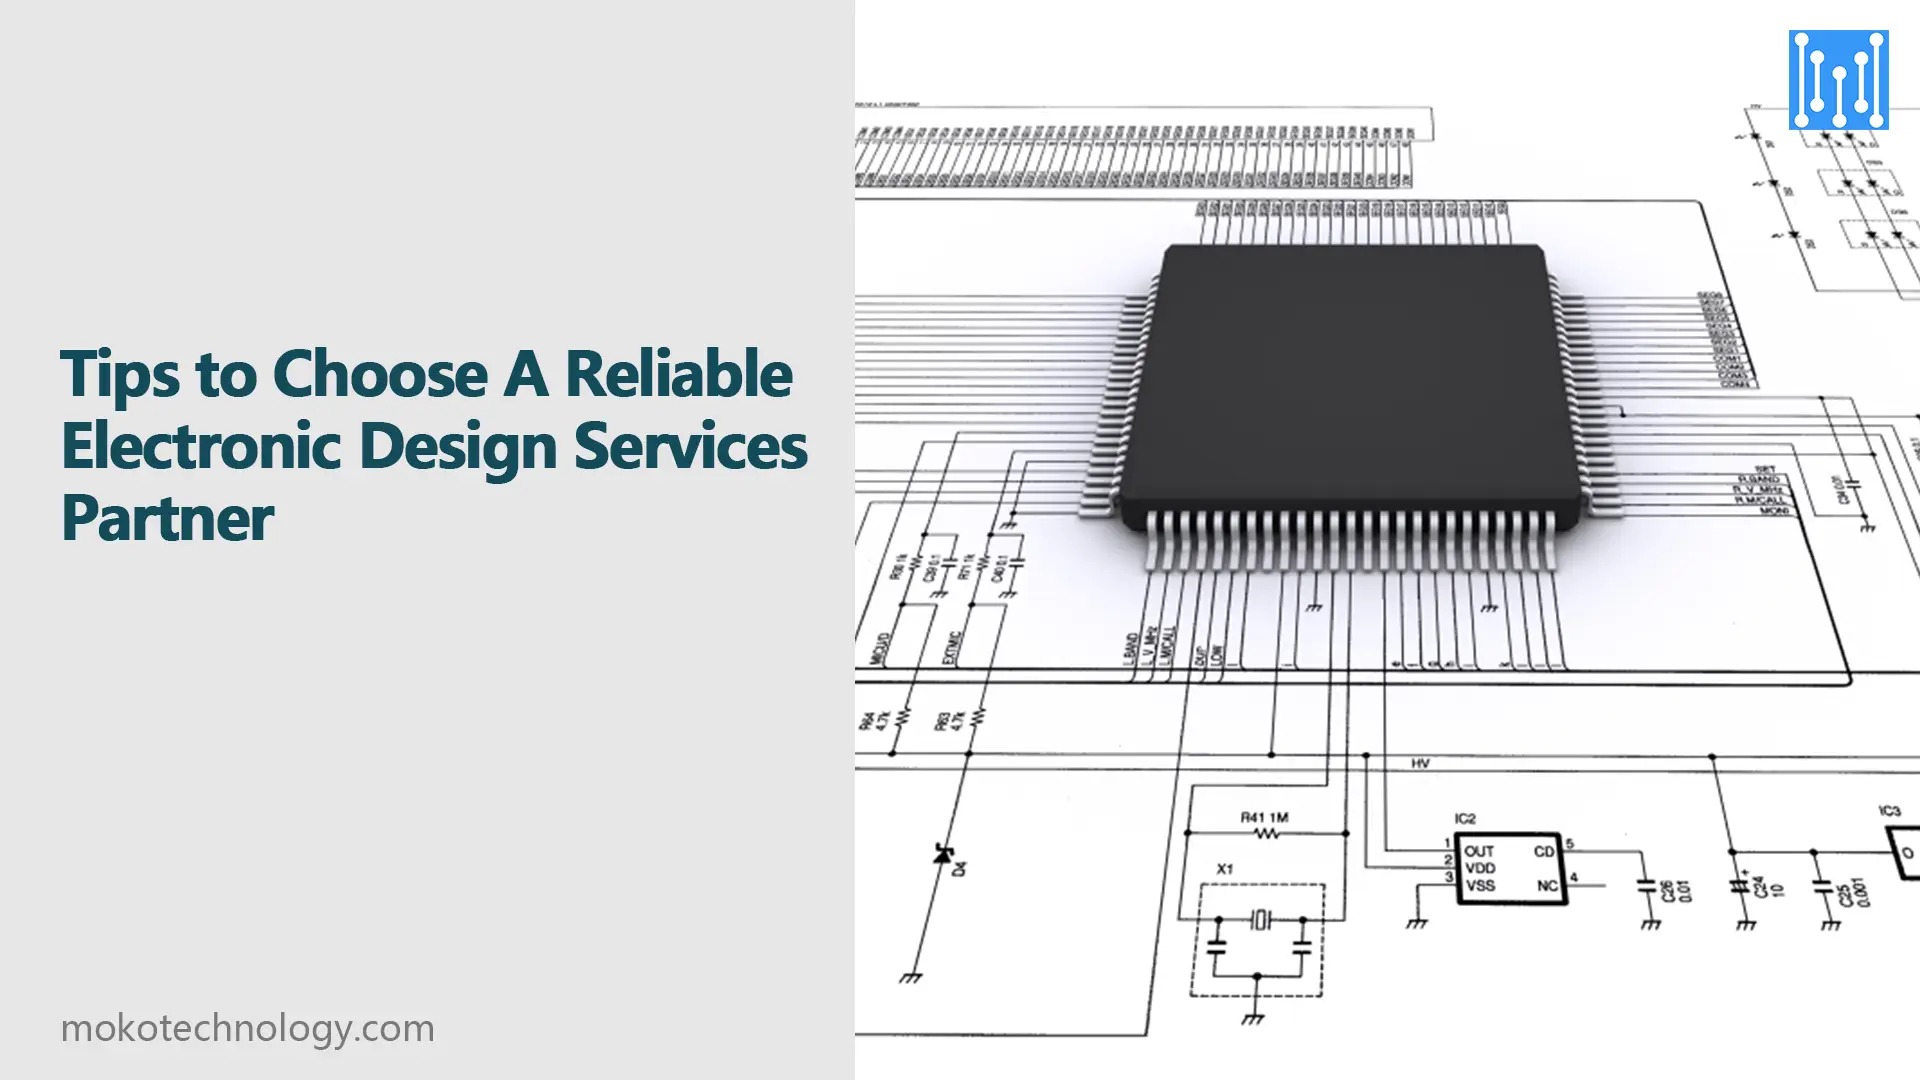 Tips to Choose A Reliable Electronic Design Services Partner